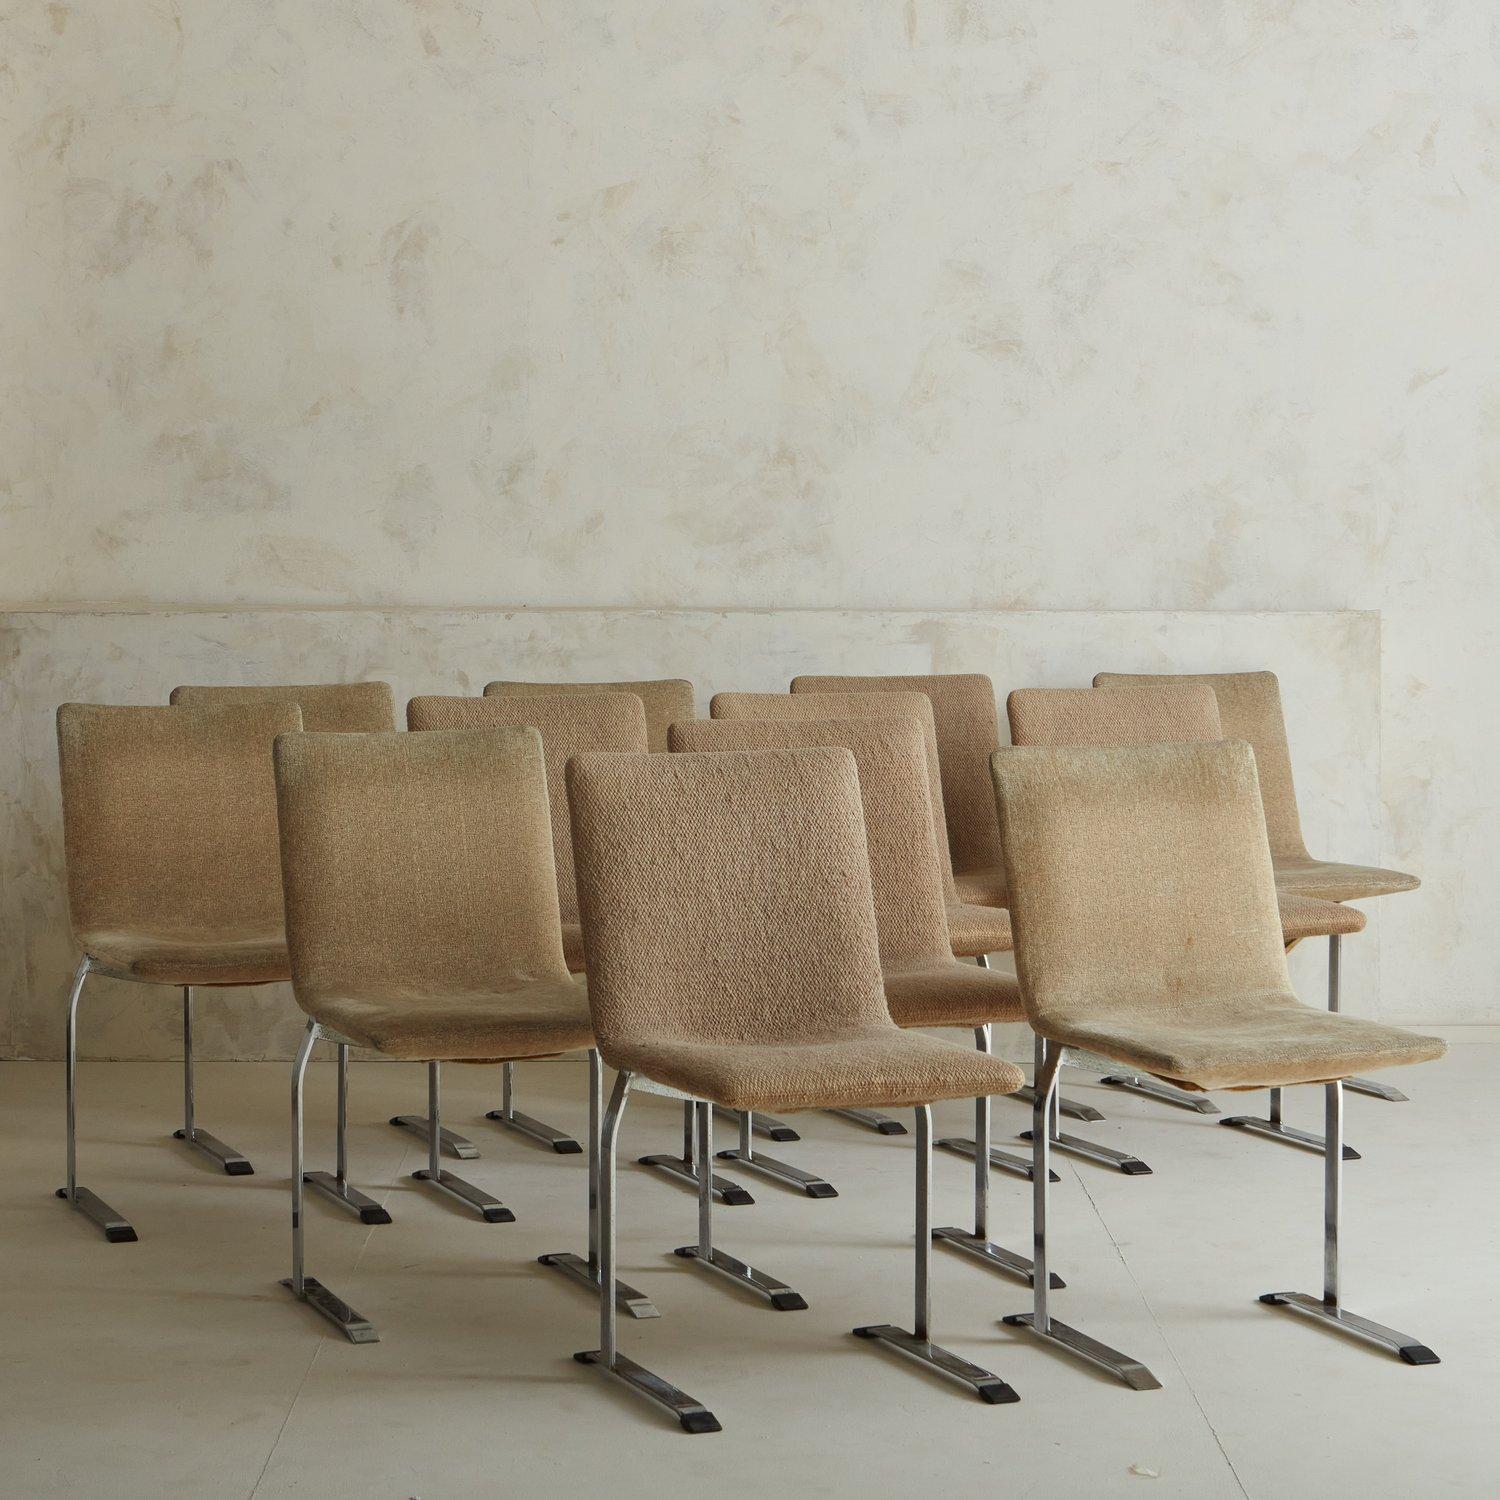 A set of 12 dining chairs designed by Giovanni Offredi for Saporiti, Italy in the 1970s. These chairs have chrome metal frames with curved seats in original taupe upholstery. Retains ‘Saporiti Italia’ stickers on metal base.

Giovanni Offredi